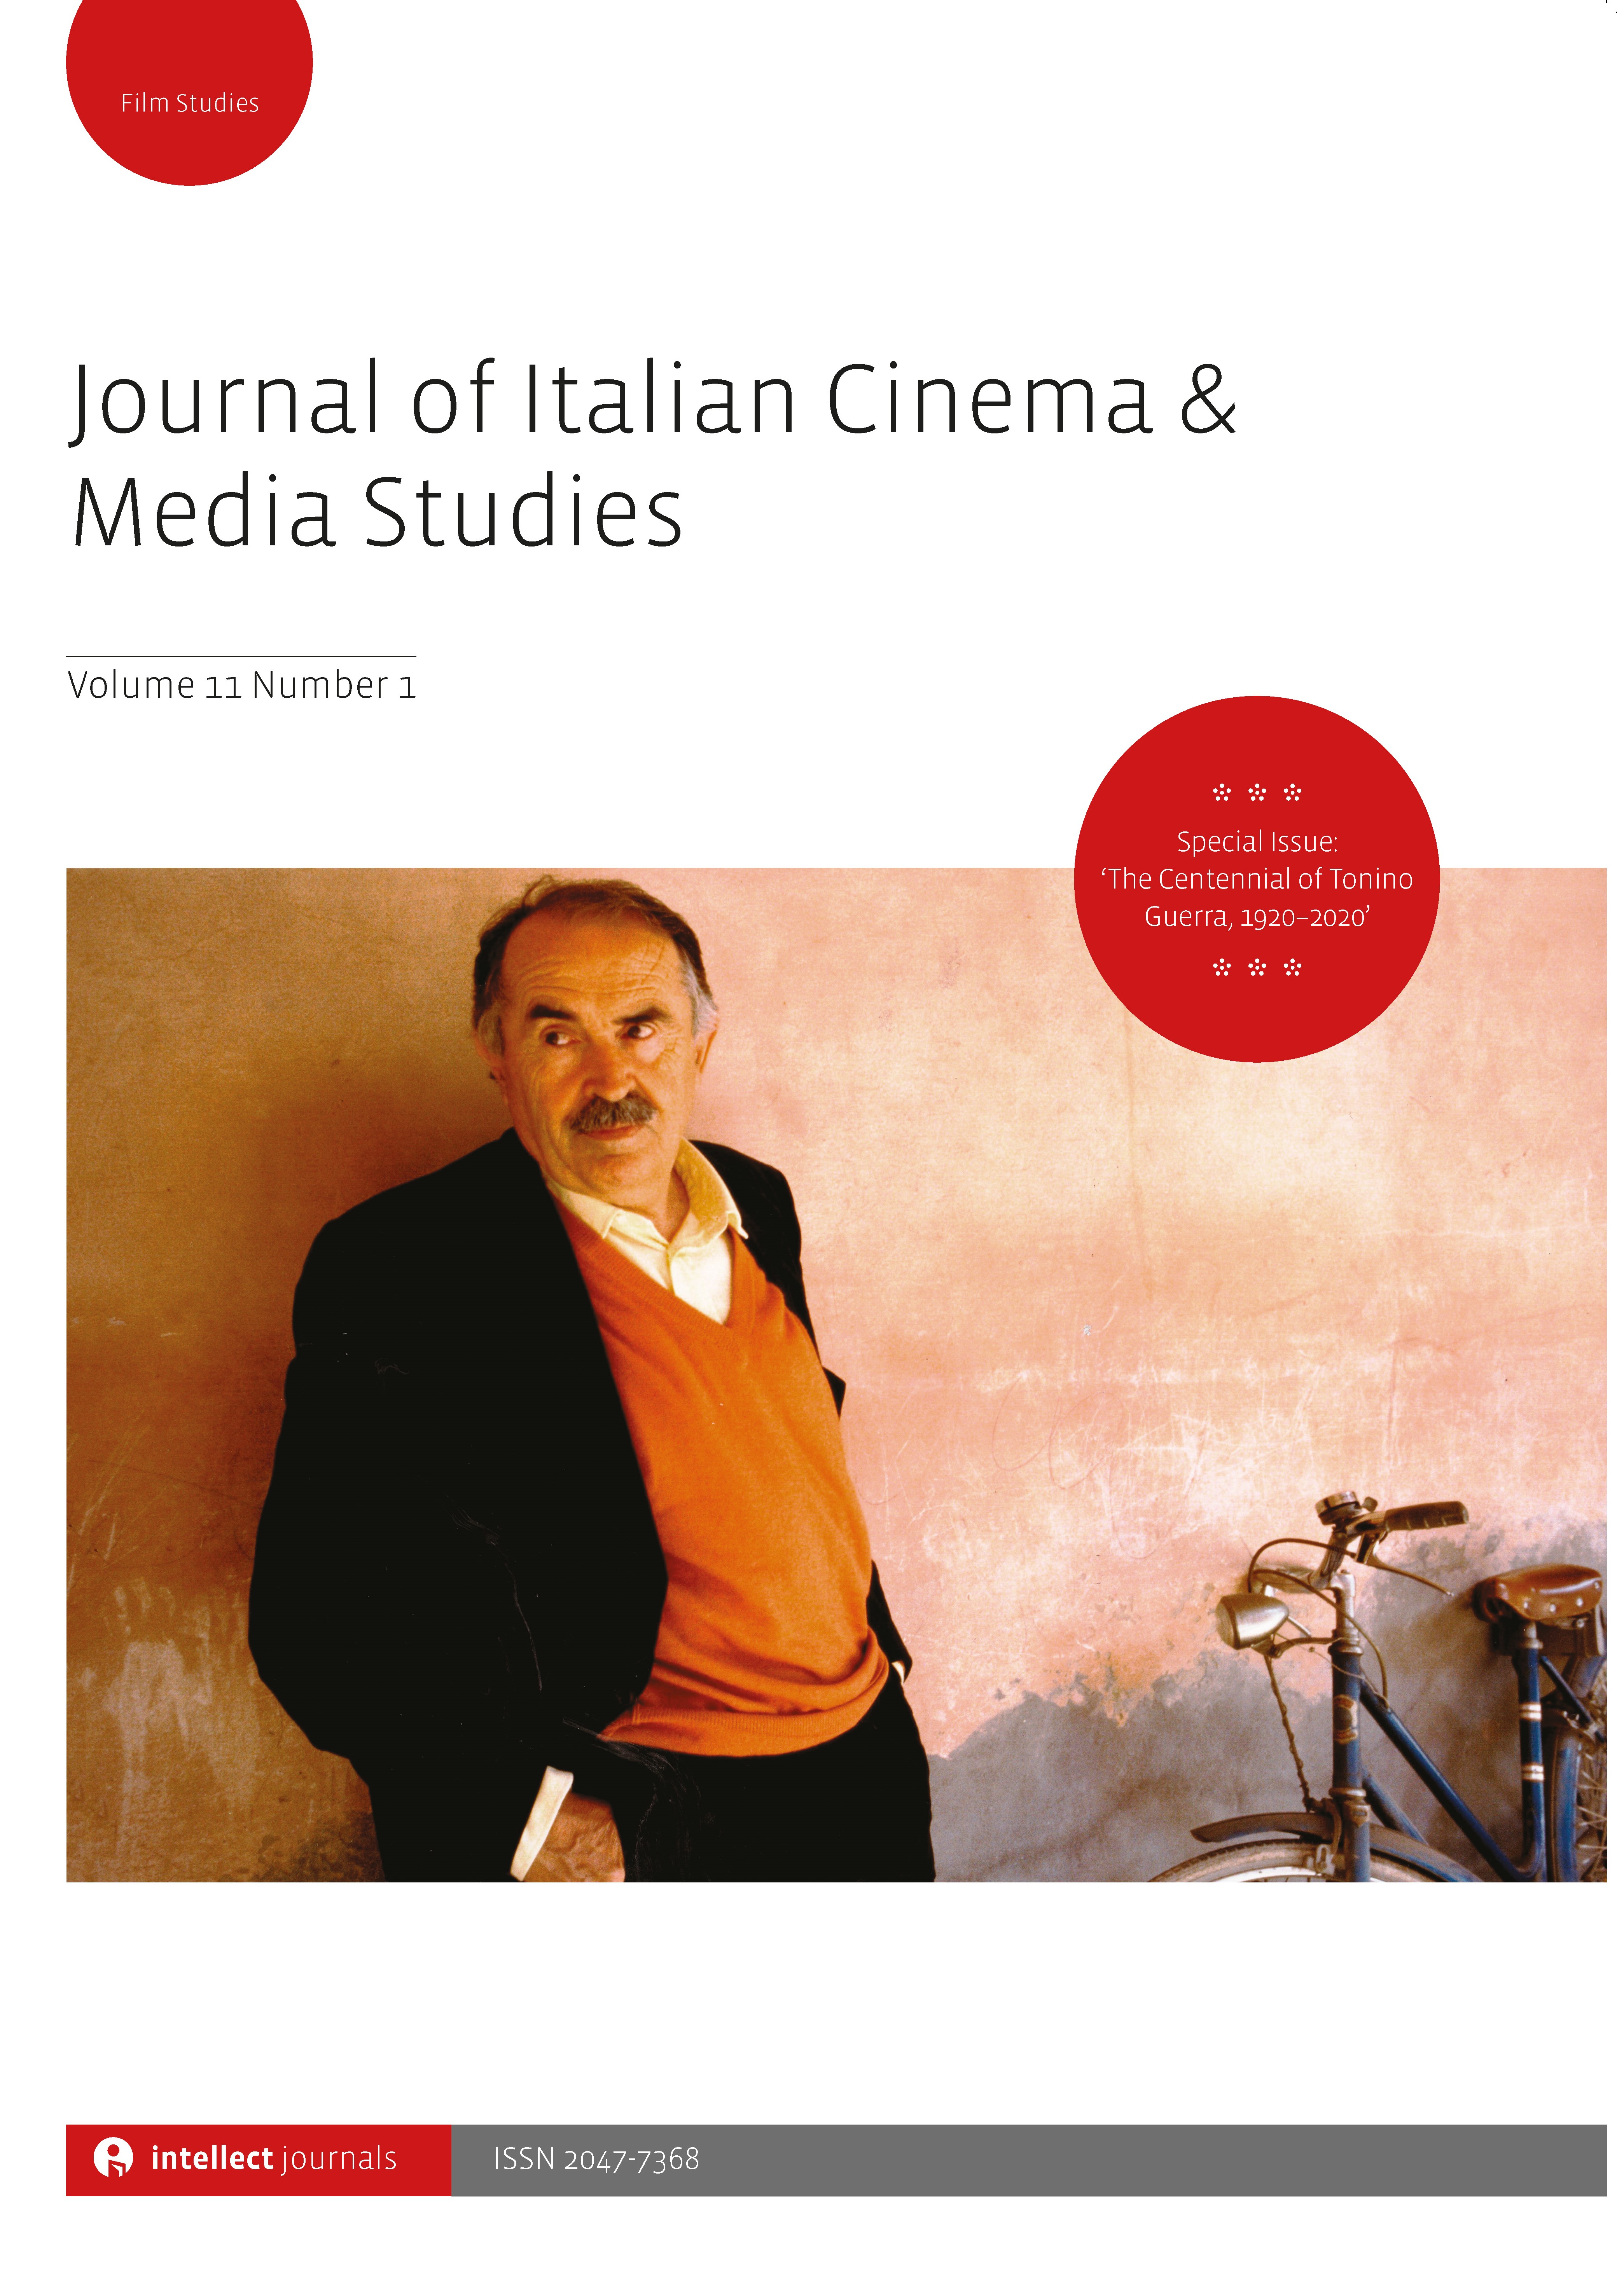 Journal of Italian Cinema & Media Studies 11.1 is out now! Special Issue